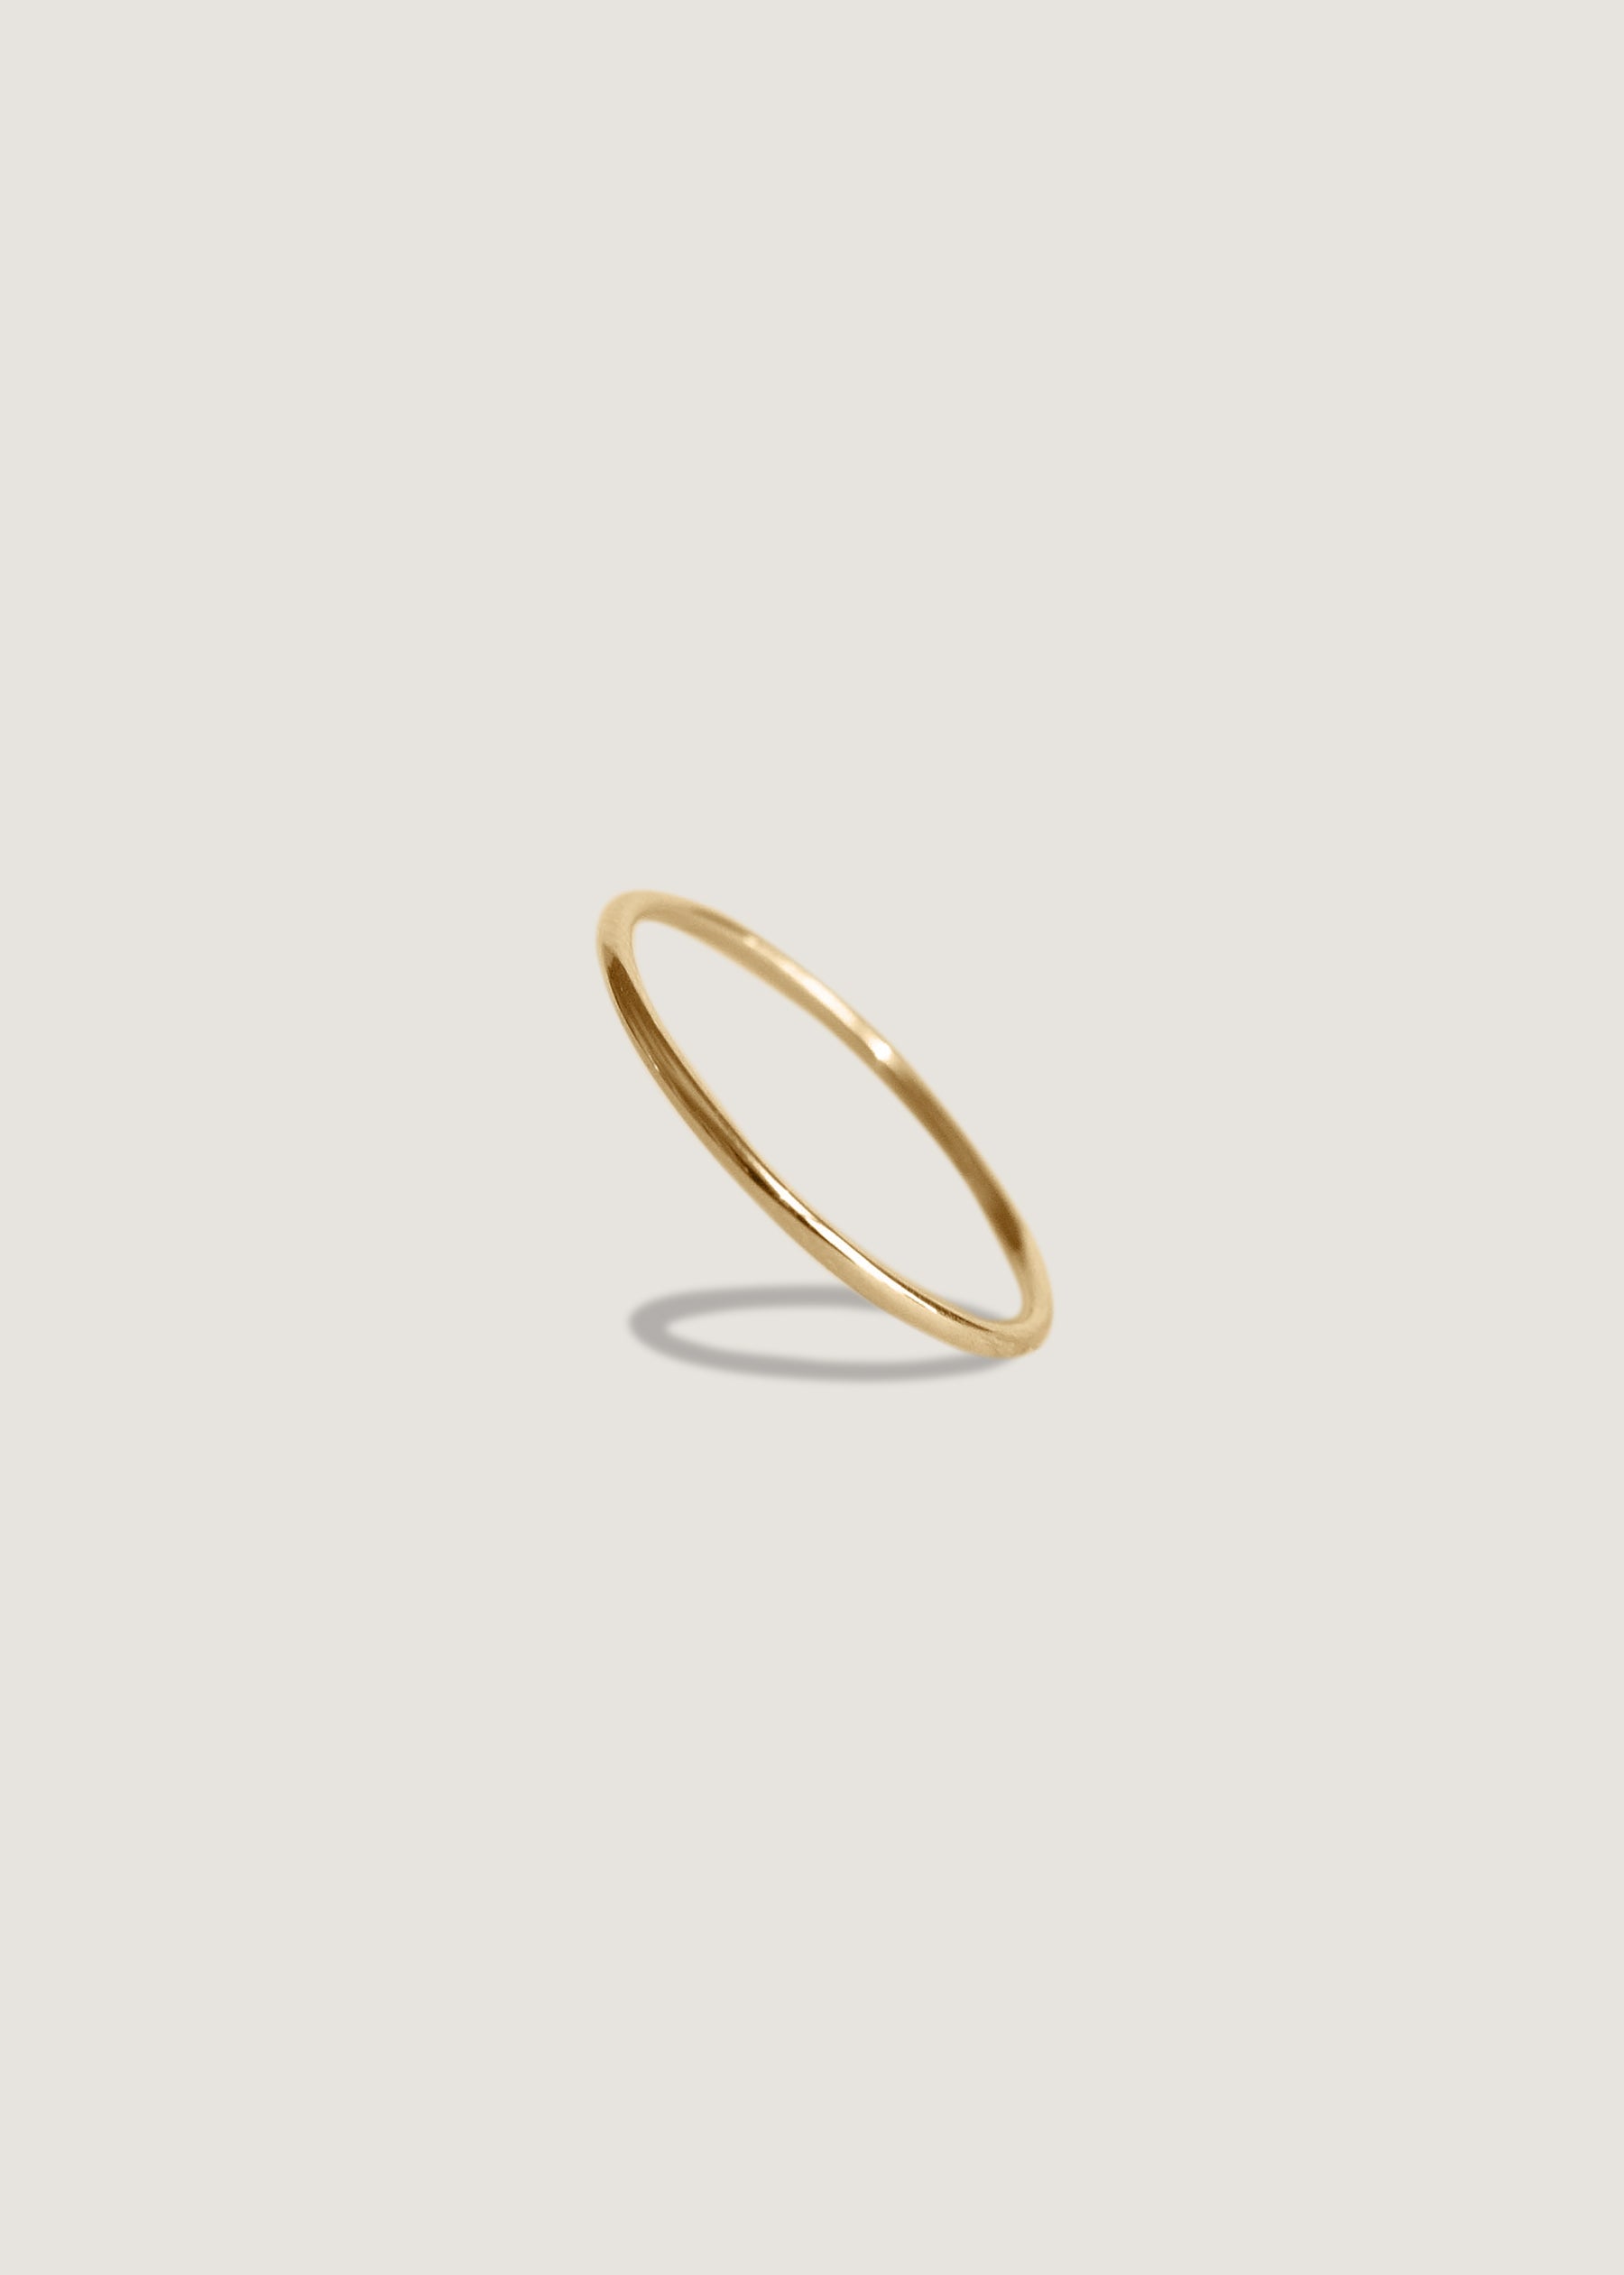 alt="Barely There Stacking Ring I"